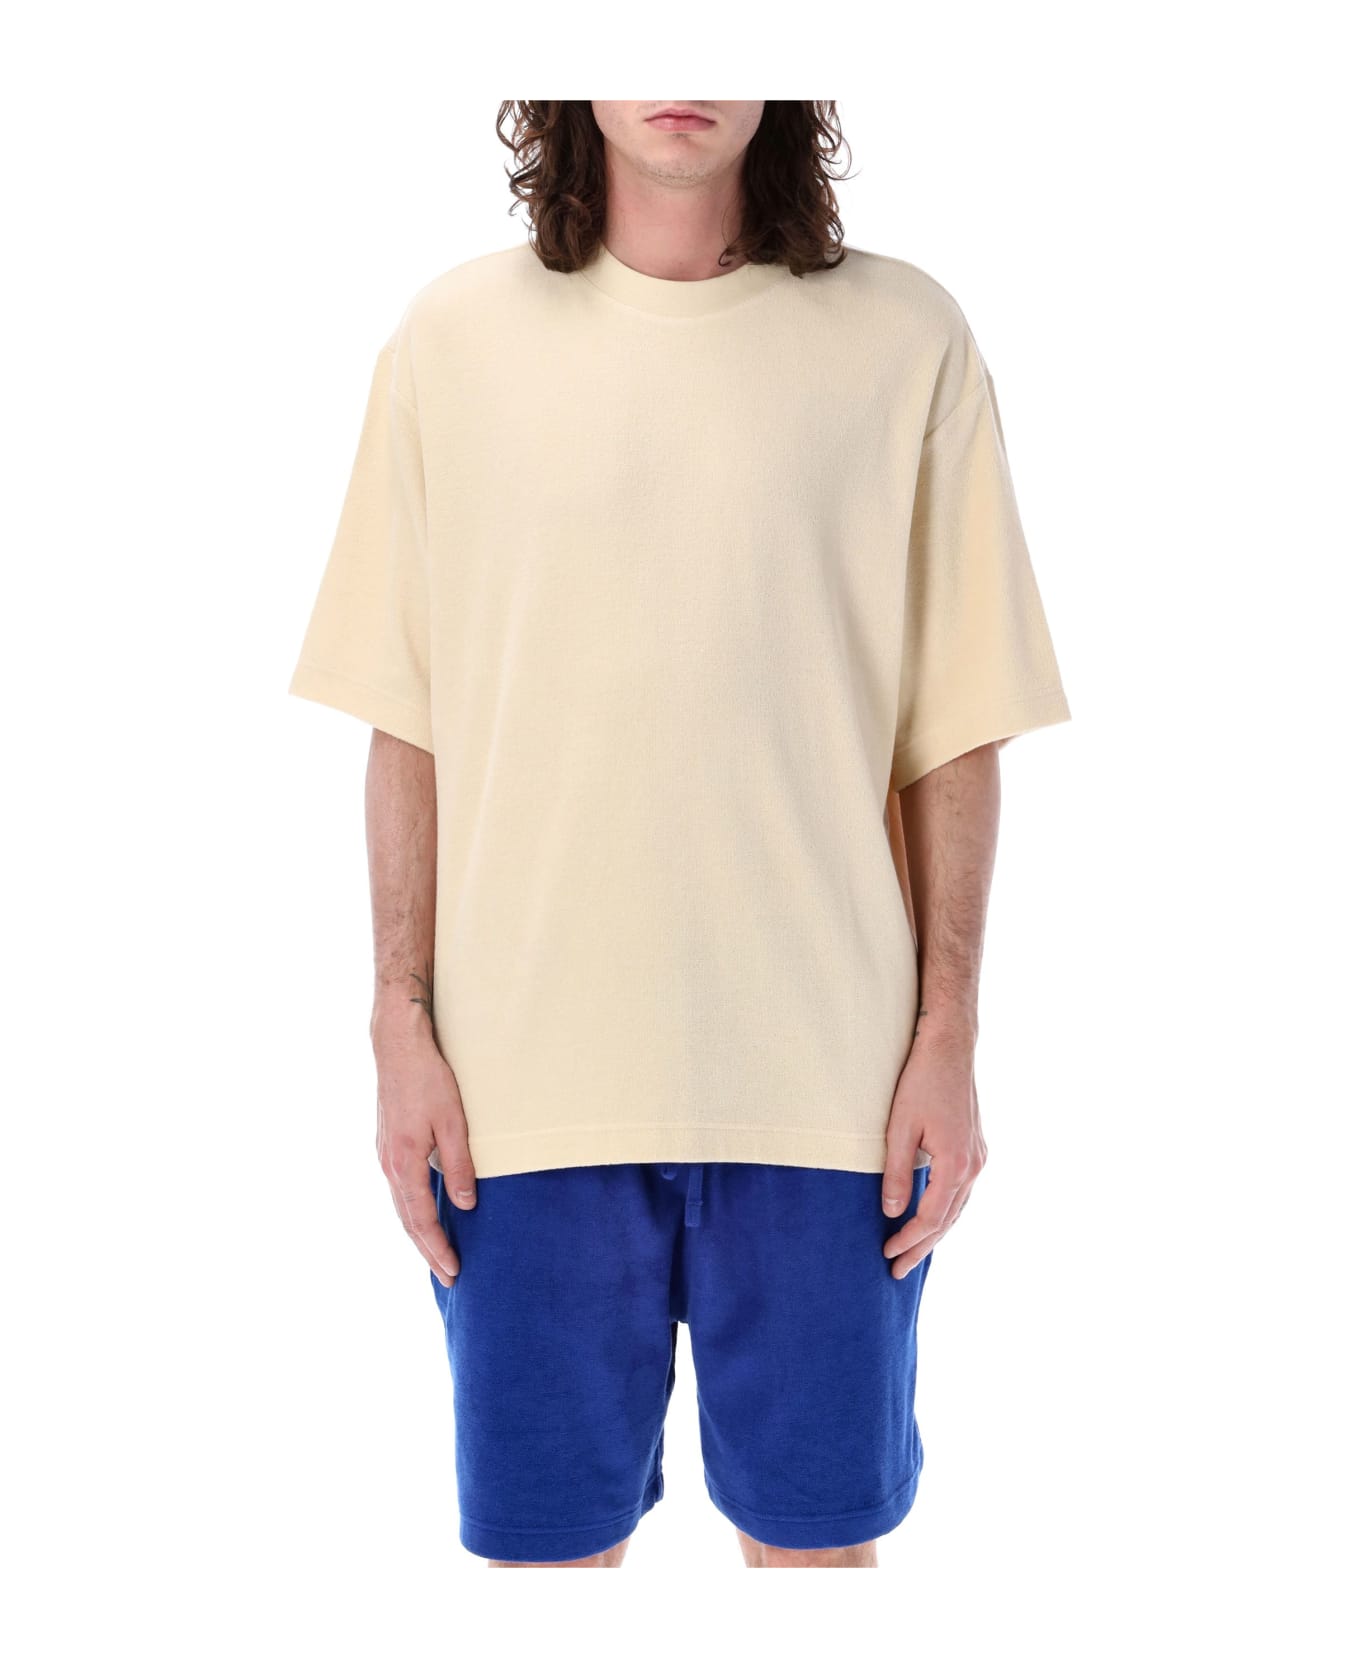 Burberry London Towelling T-shirt - CALICO